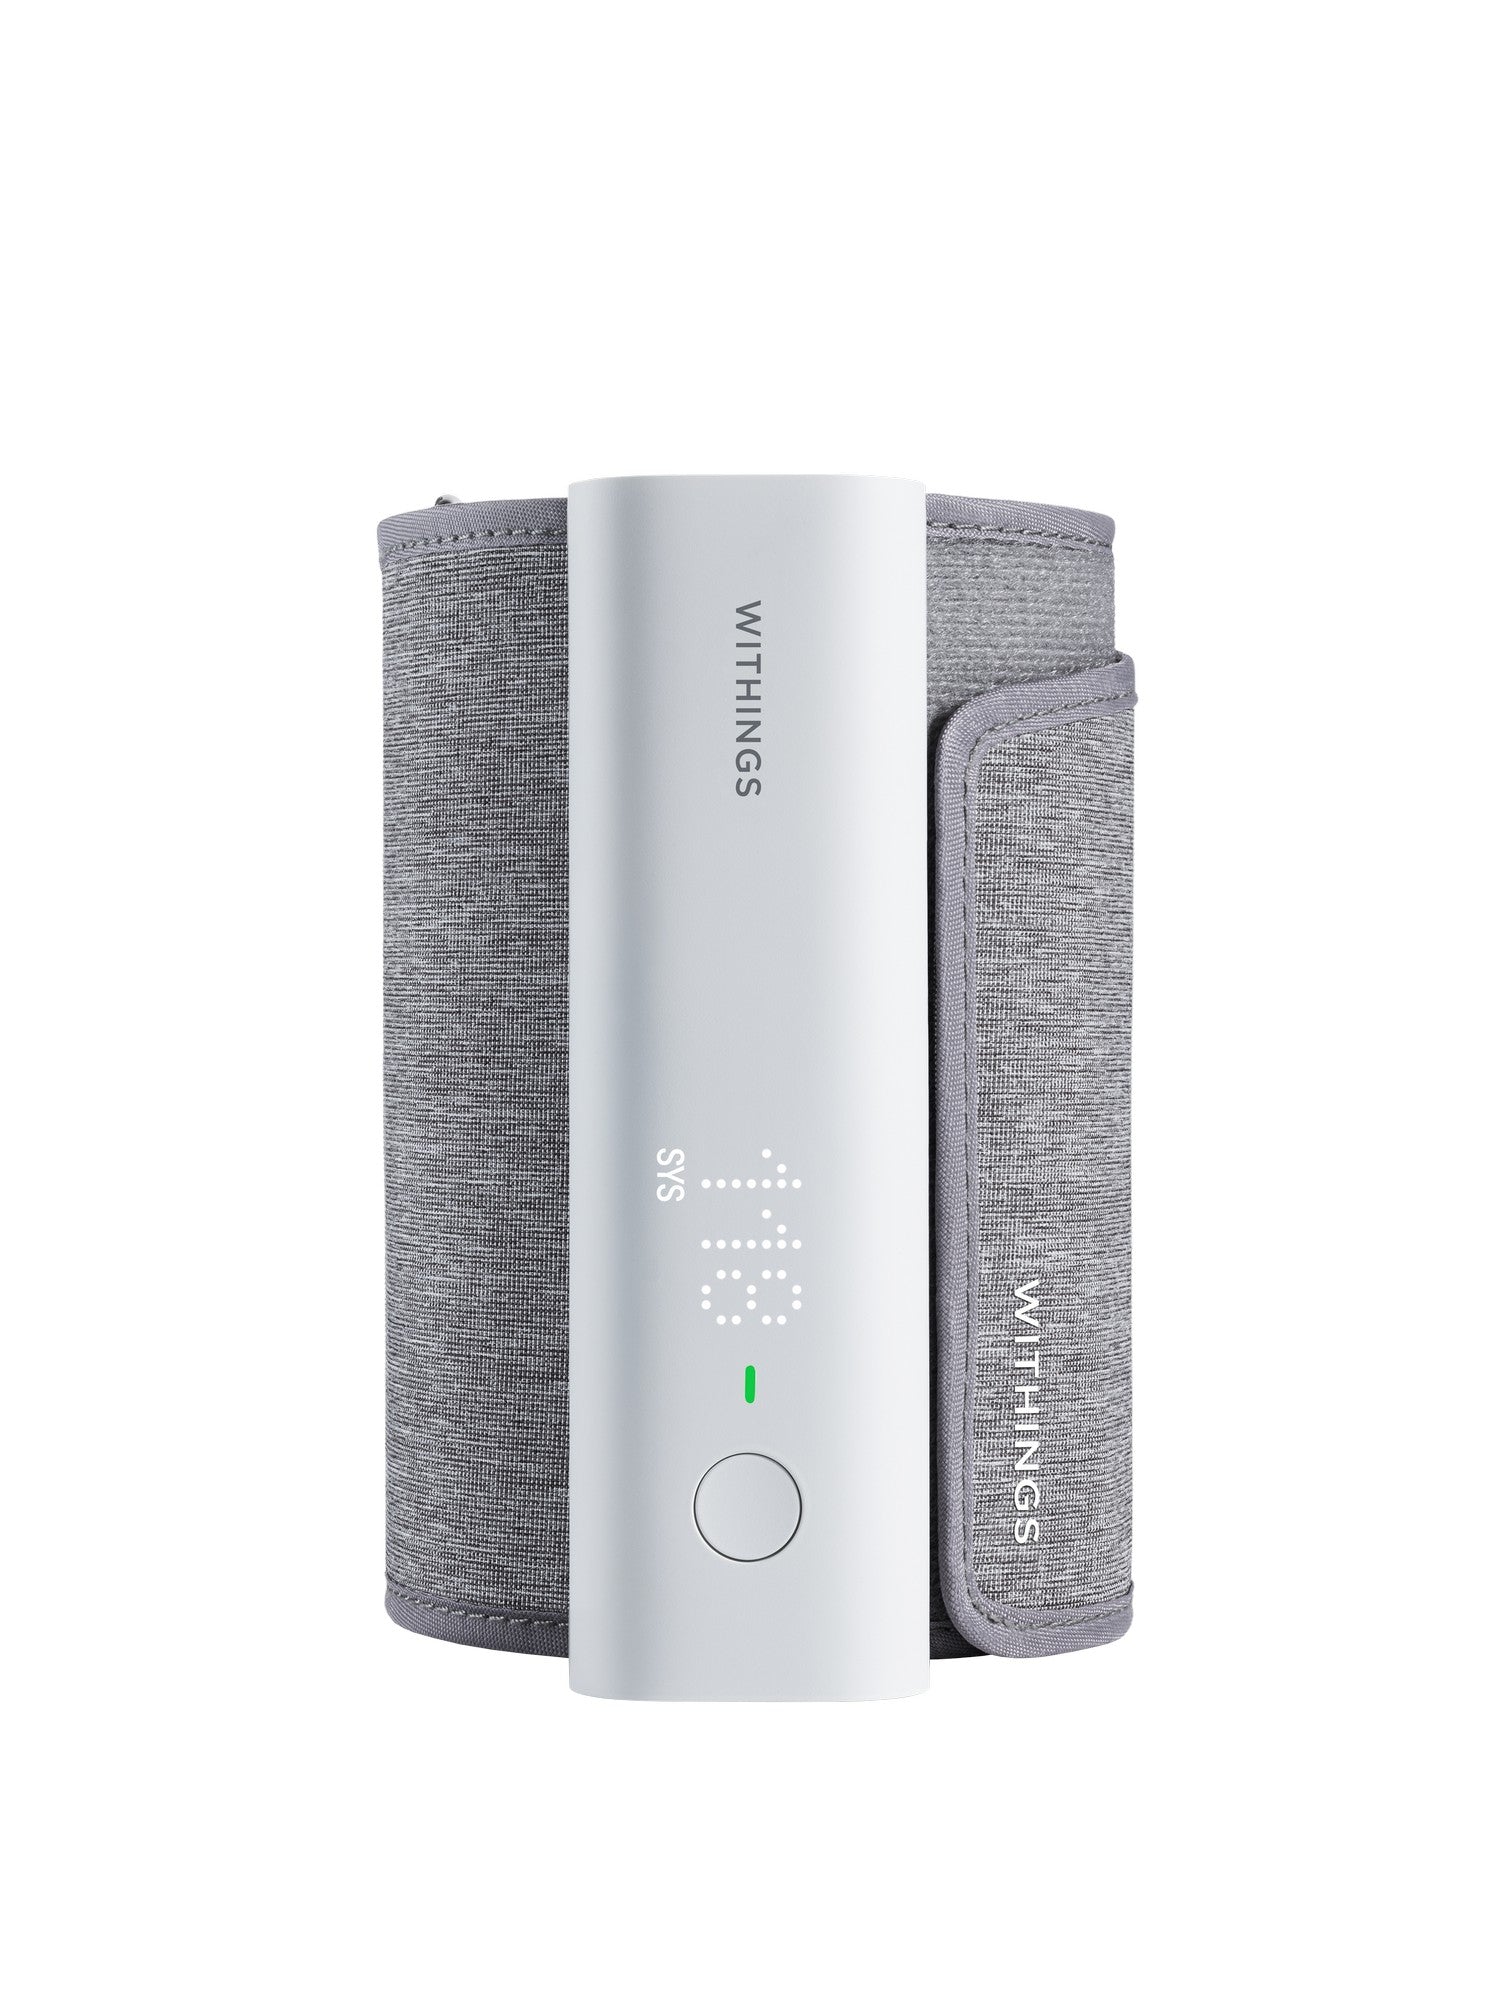 WITHINGS BPM CONNECT WI-FI SMART BLOOD PRESSURE MONITOR